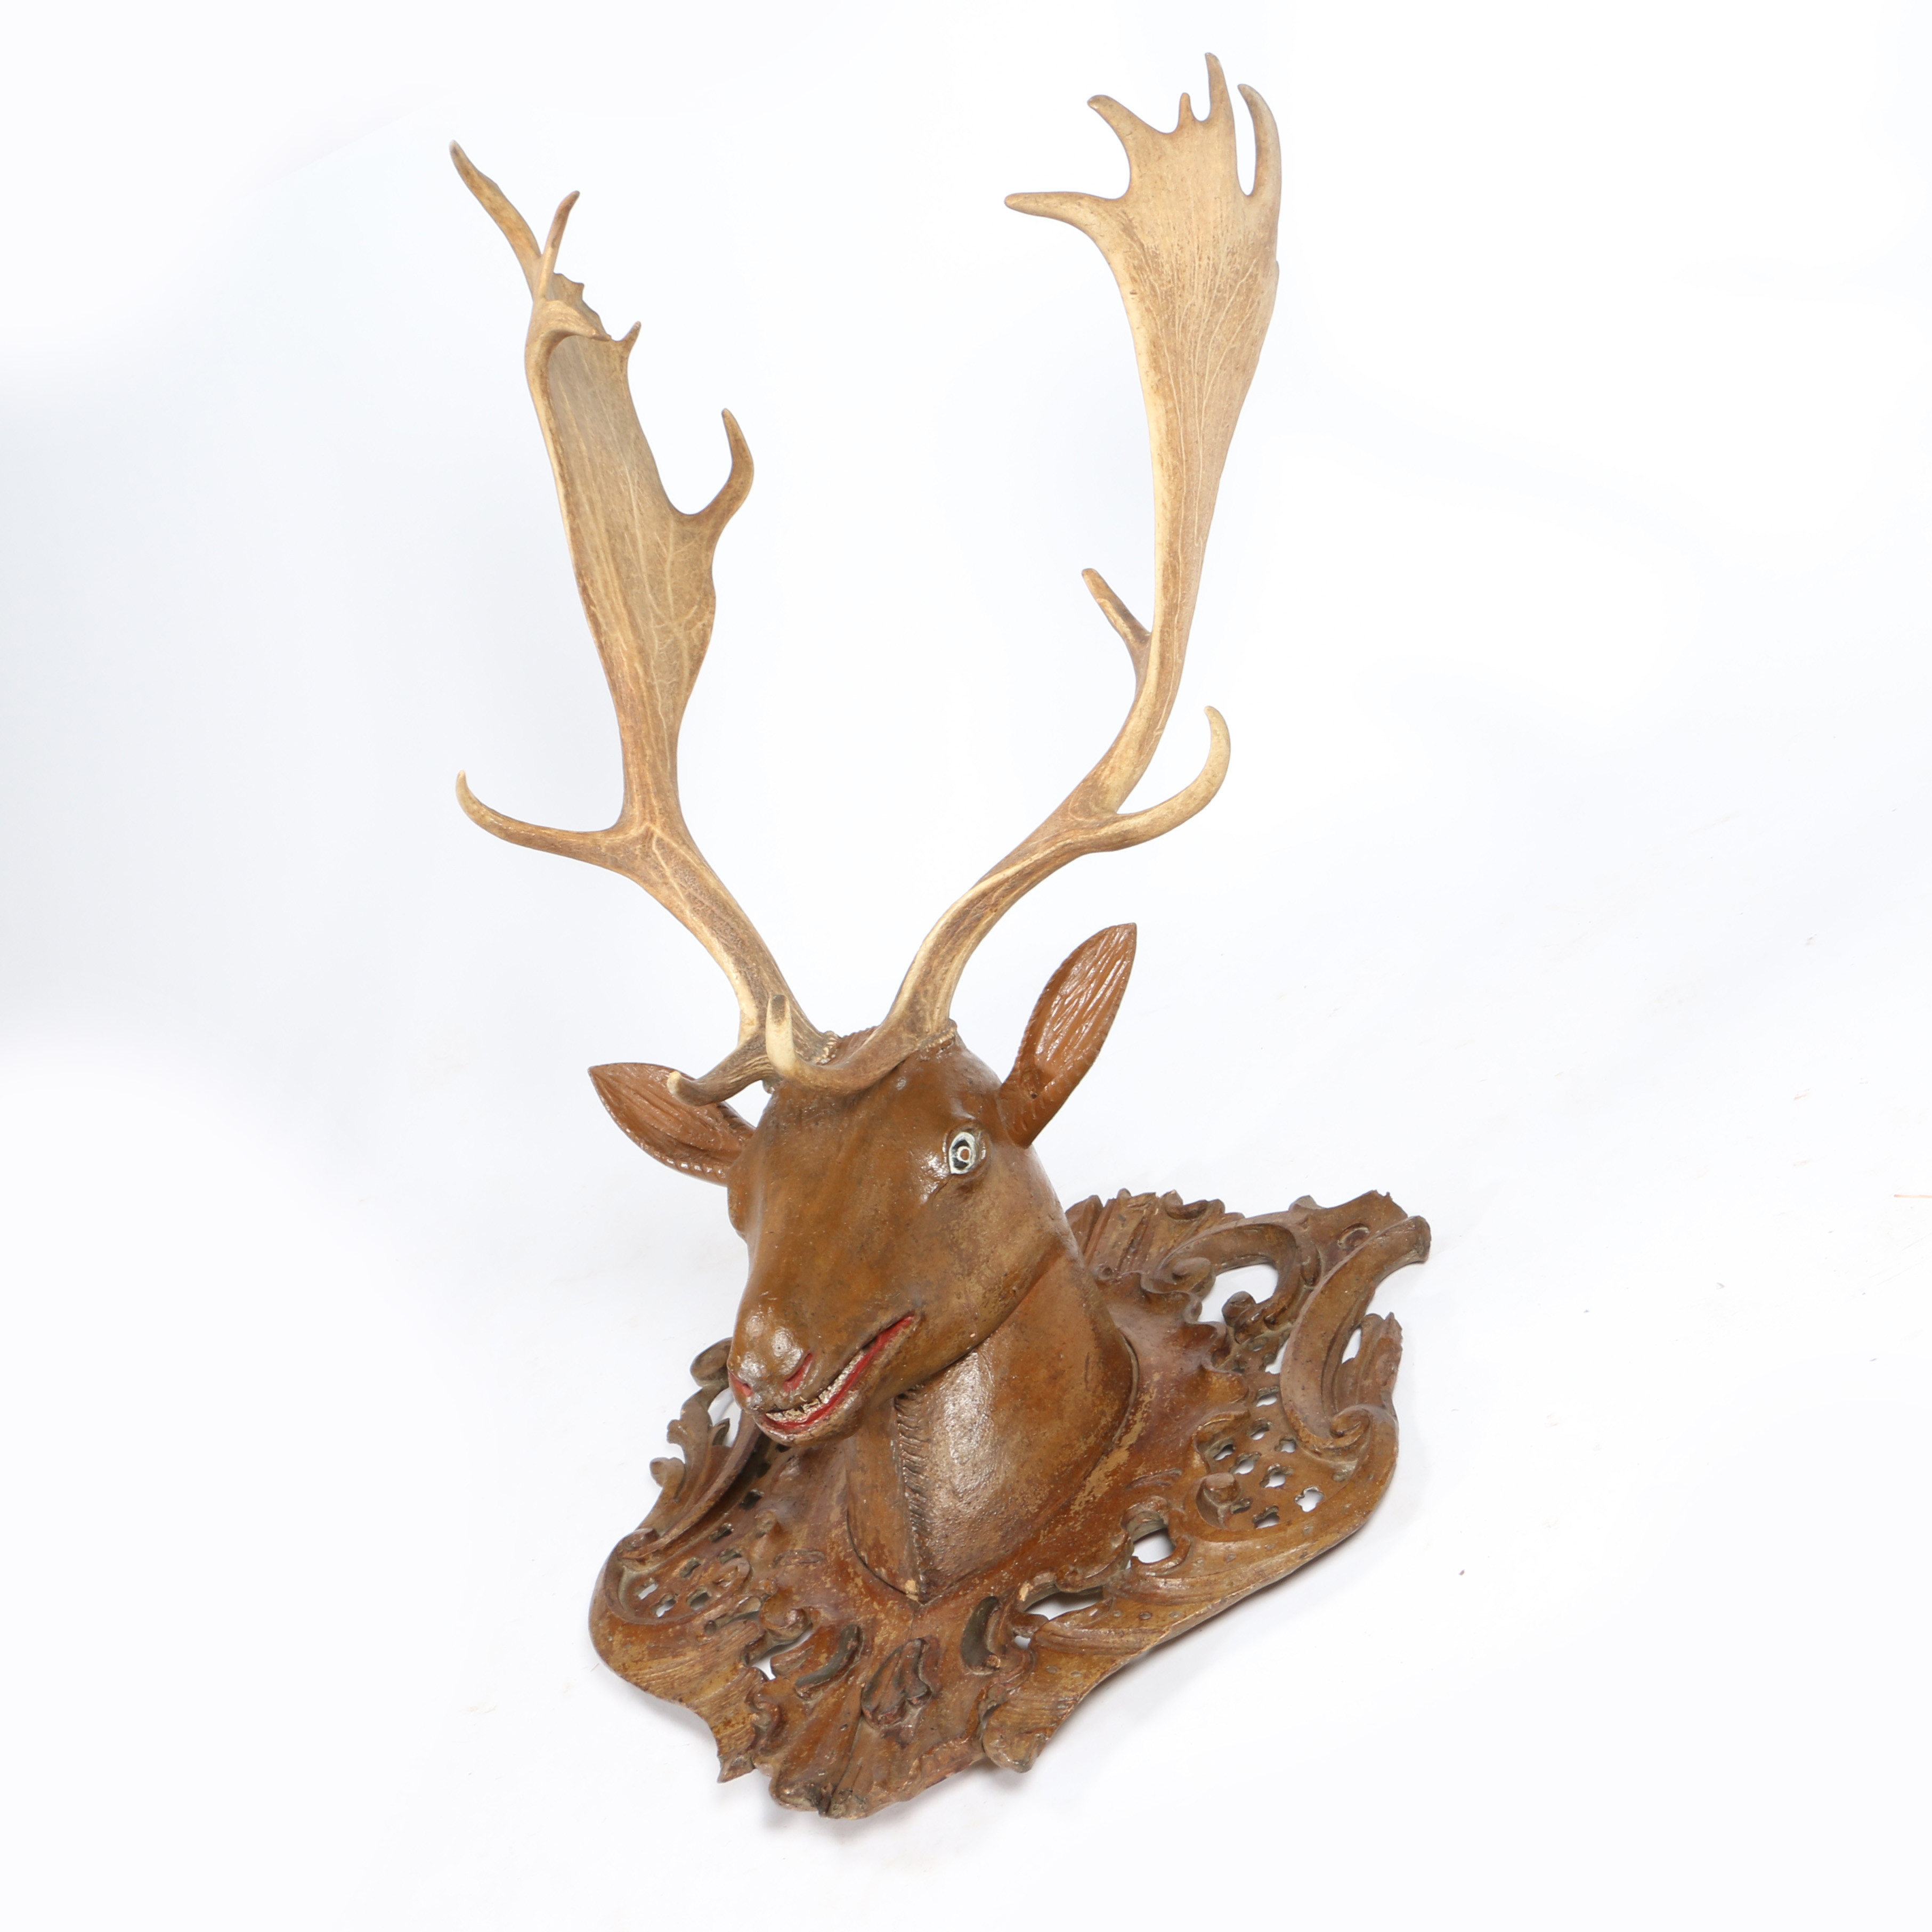 A LATE 19TH/EARLY 20TH CENTURY CARVED STAG HEAD WITH ANTLERS. - Image 2 of 3